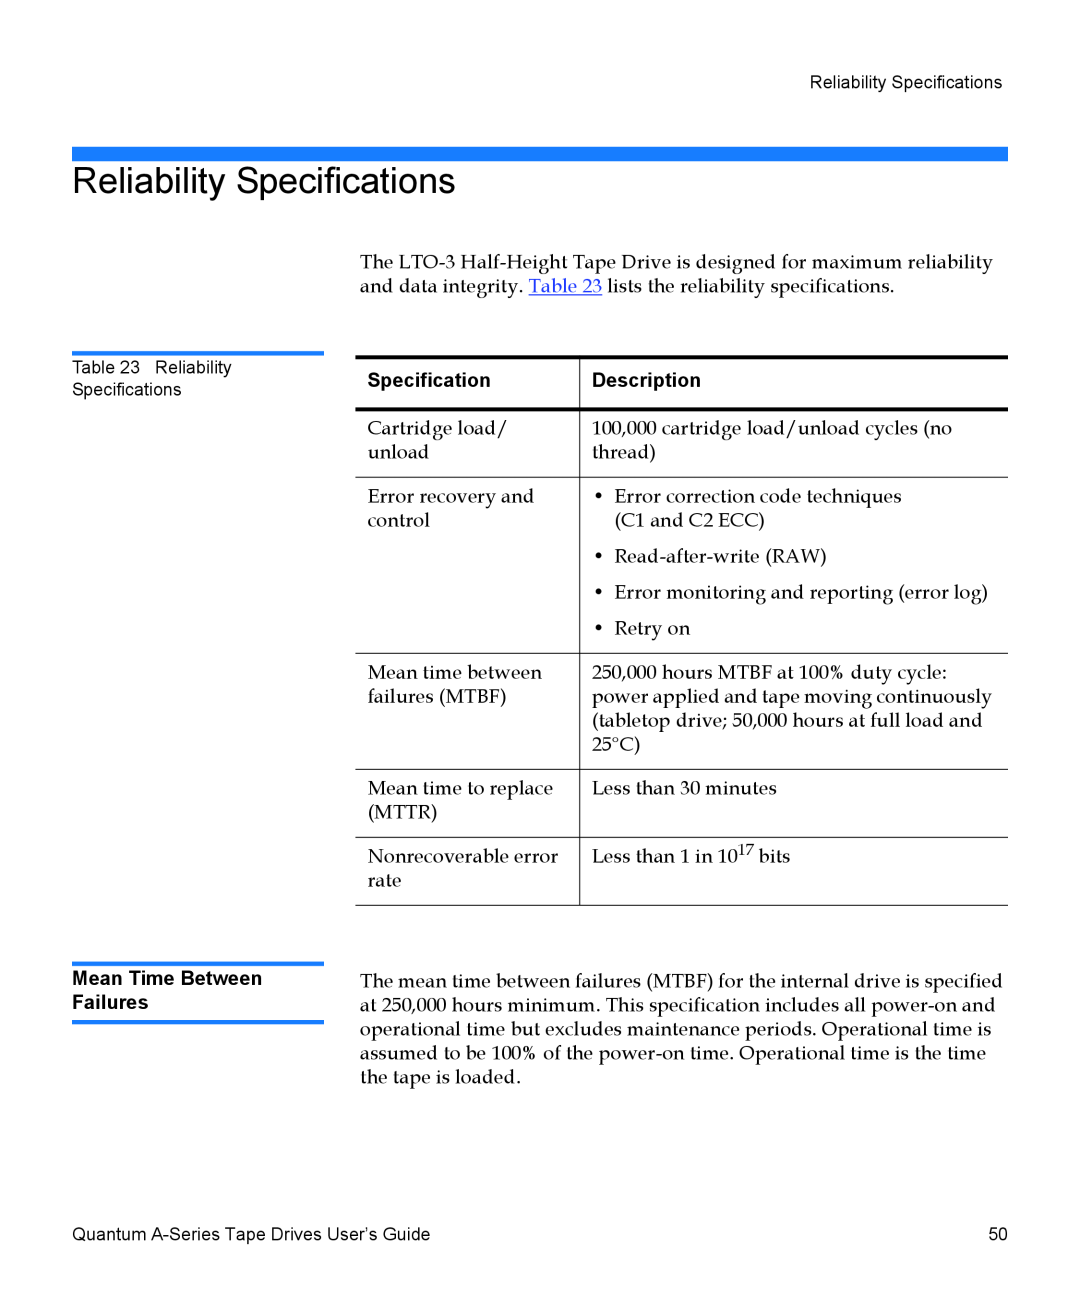 Quantum A-Series manual Reliability Specifications 